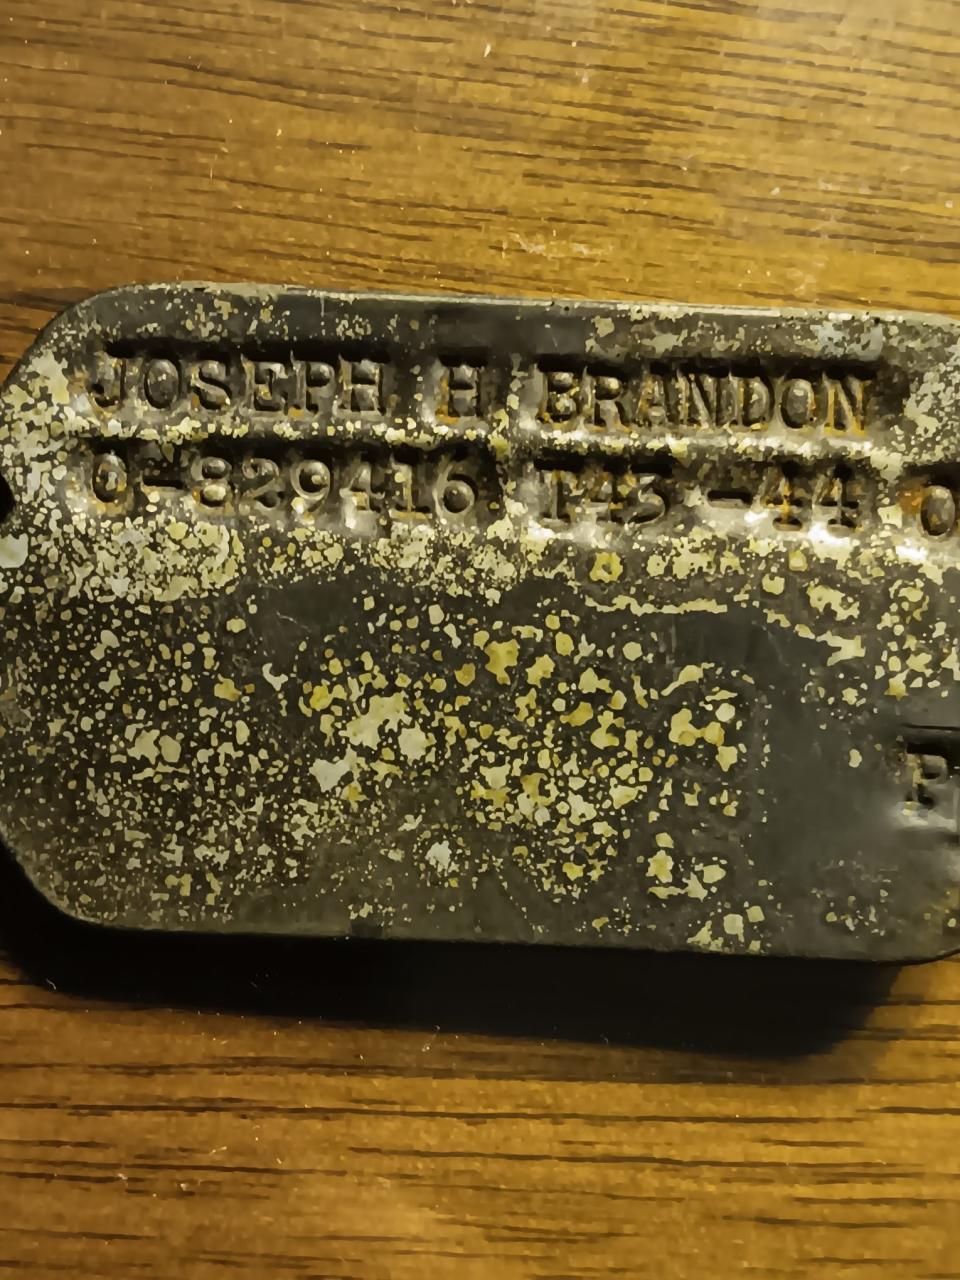 The dog tag of Joseph Brandon, who was killed in an airplane crash in Cervinara, Italy in 1945. The dog tag was recovered by Raimondo Brevetti, who was 19 years old at the time.